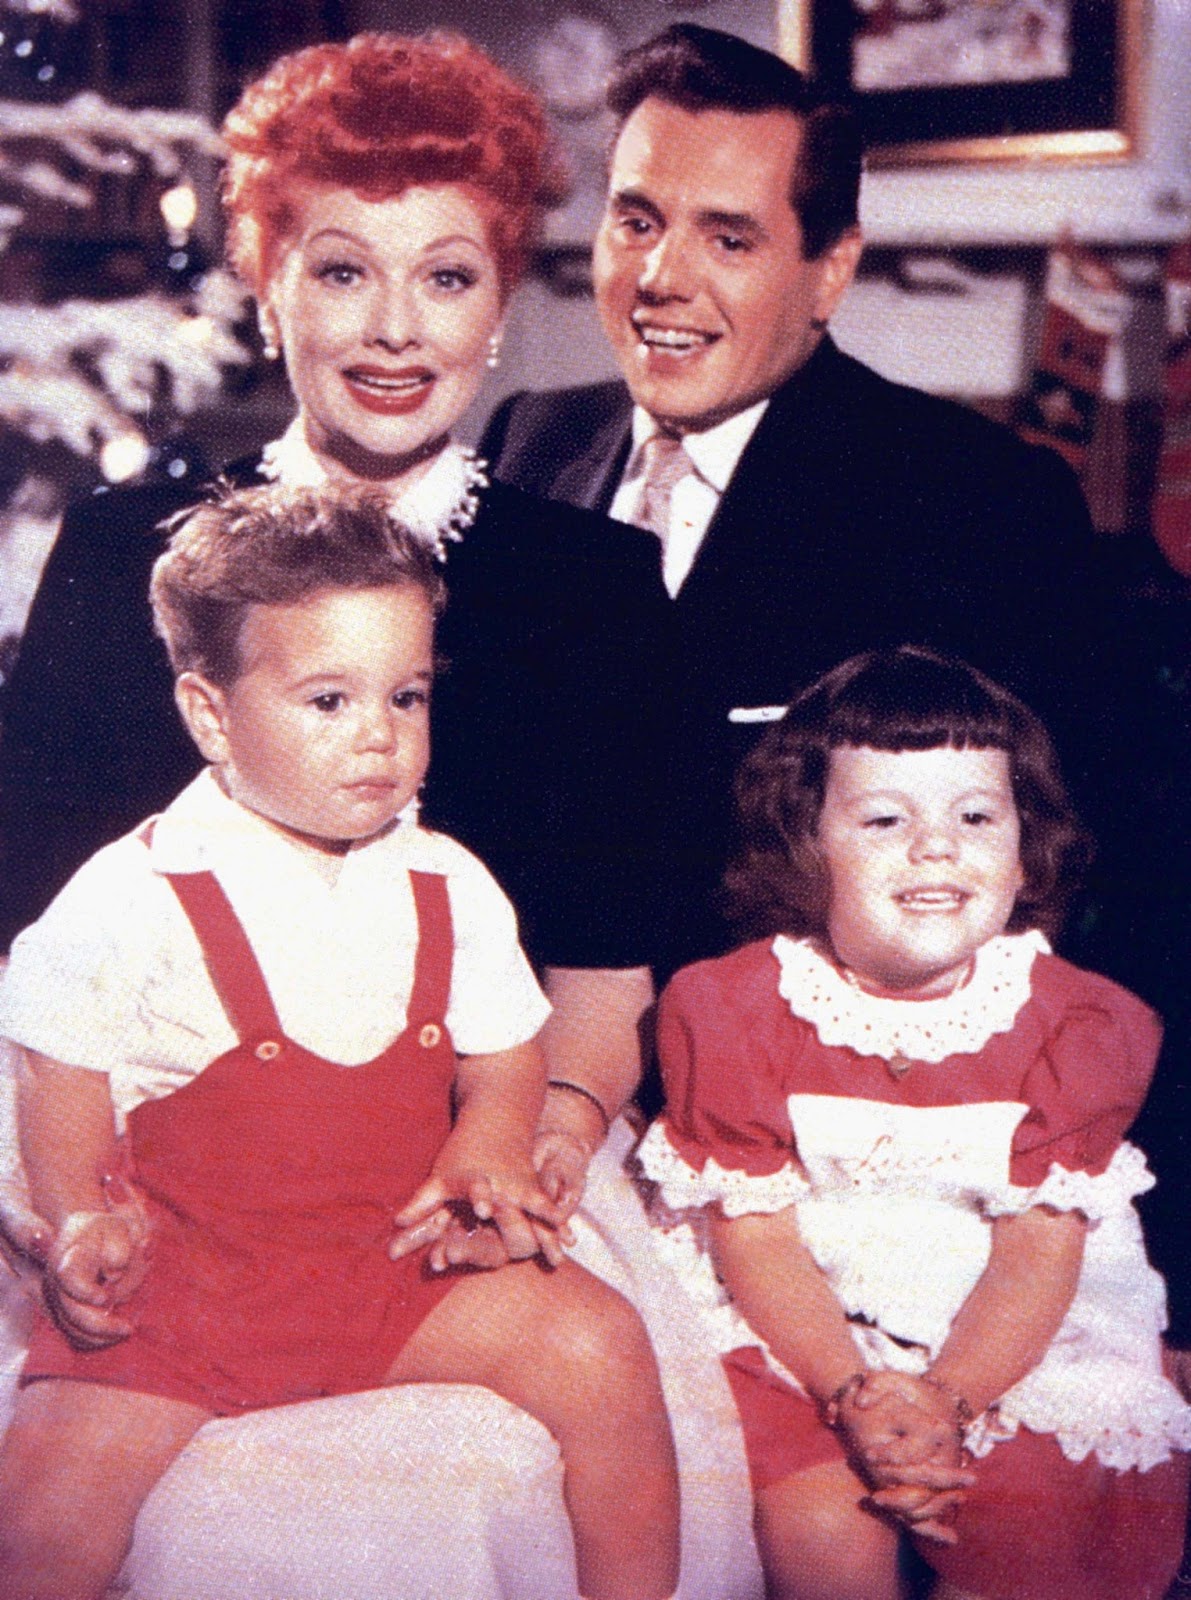 Lucy often brought her children Lucie and Desi Jr to the I Love Lucy set